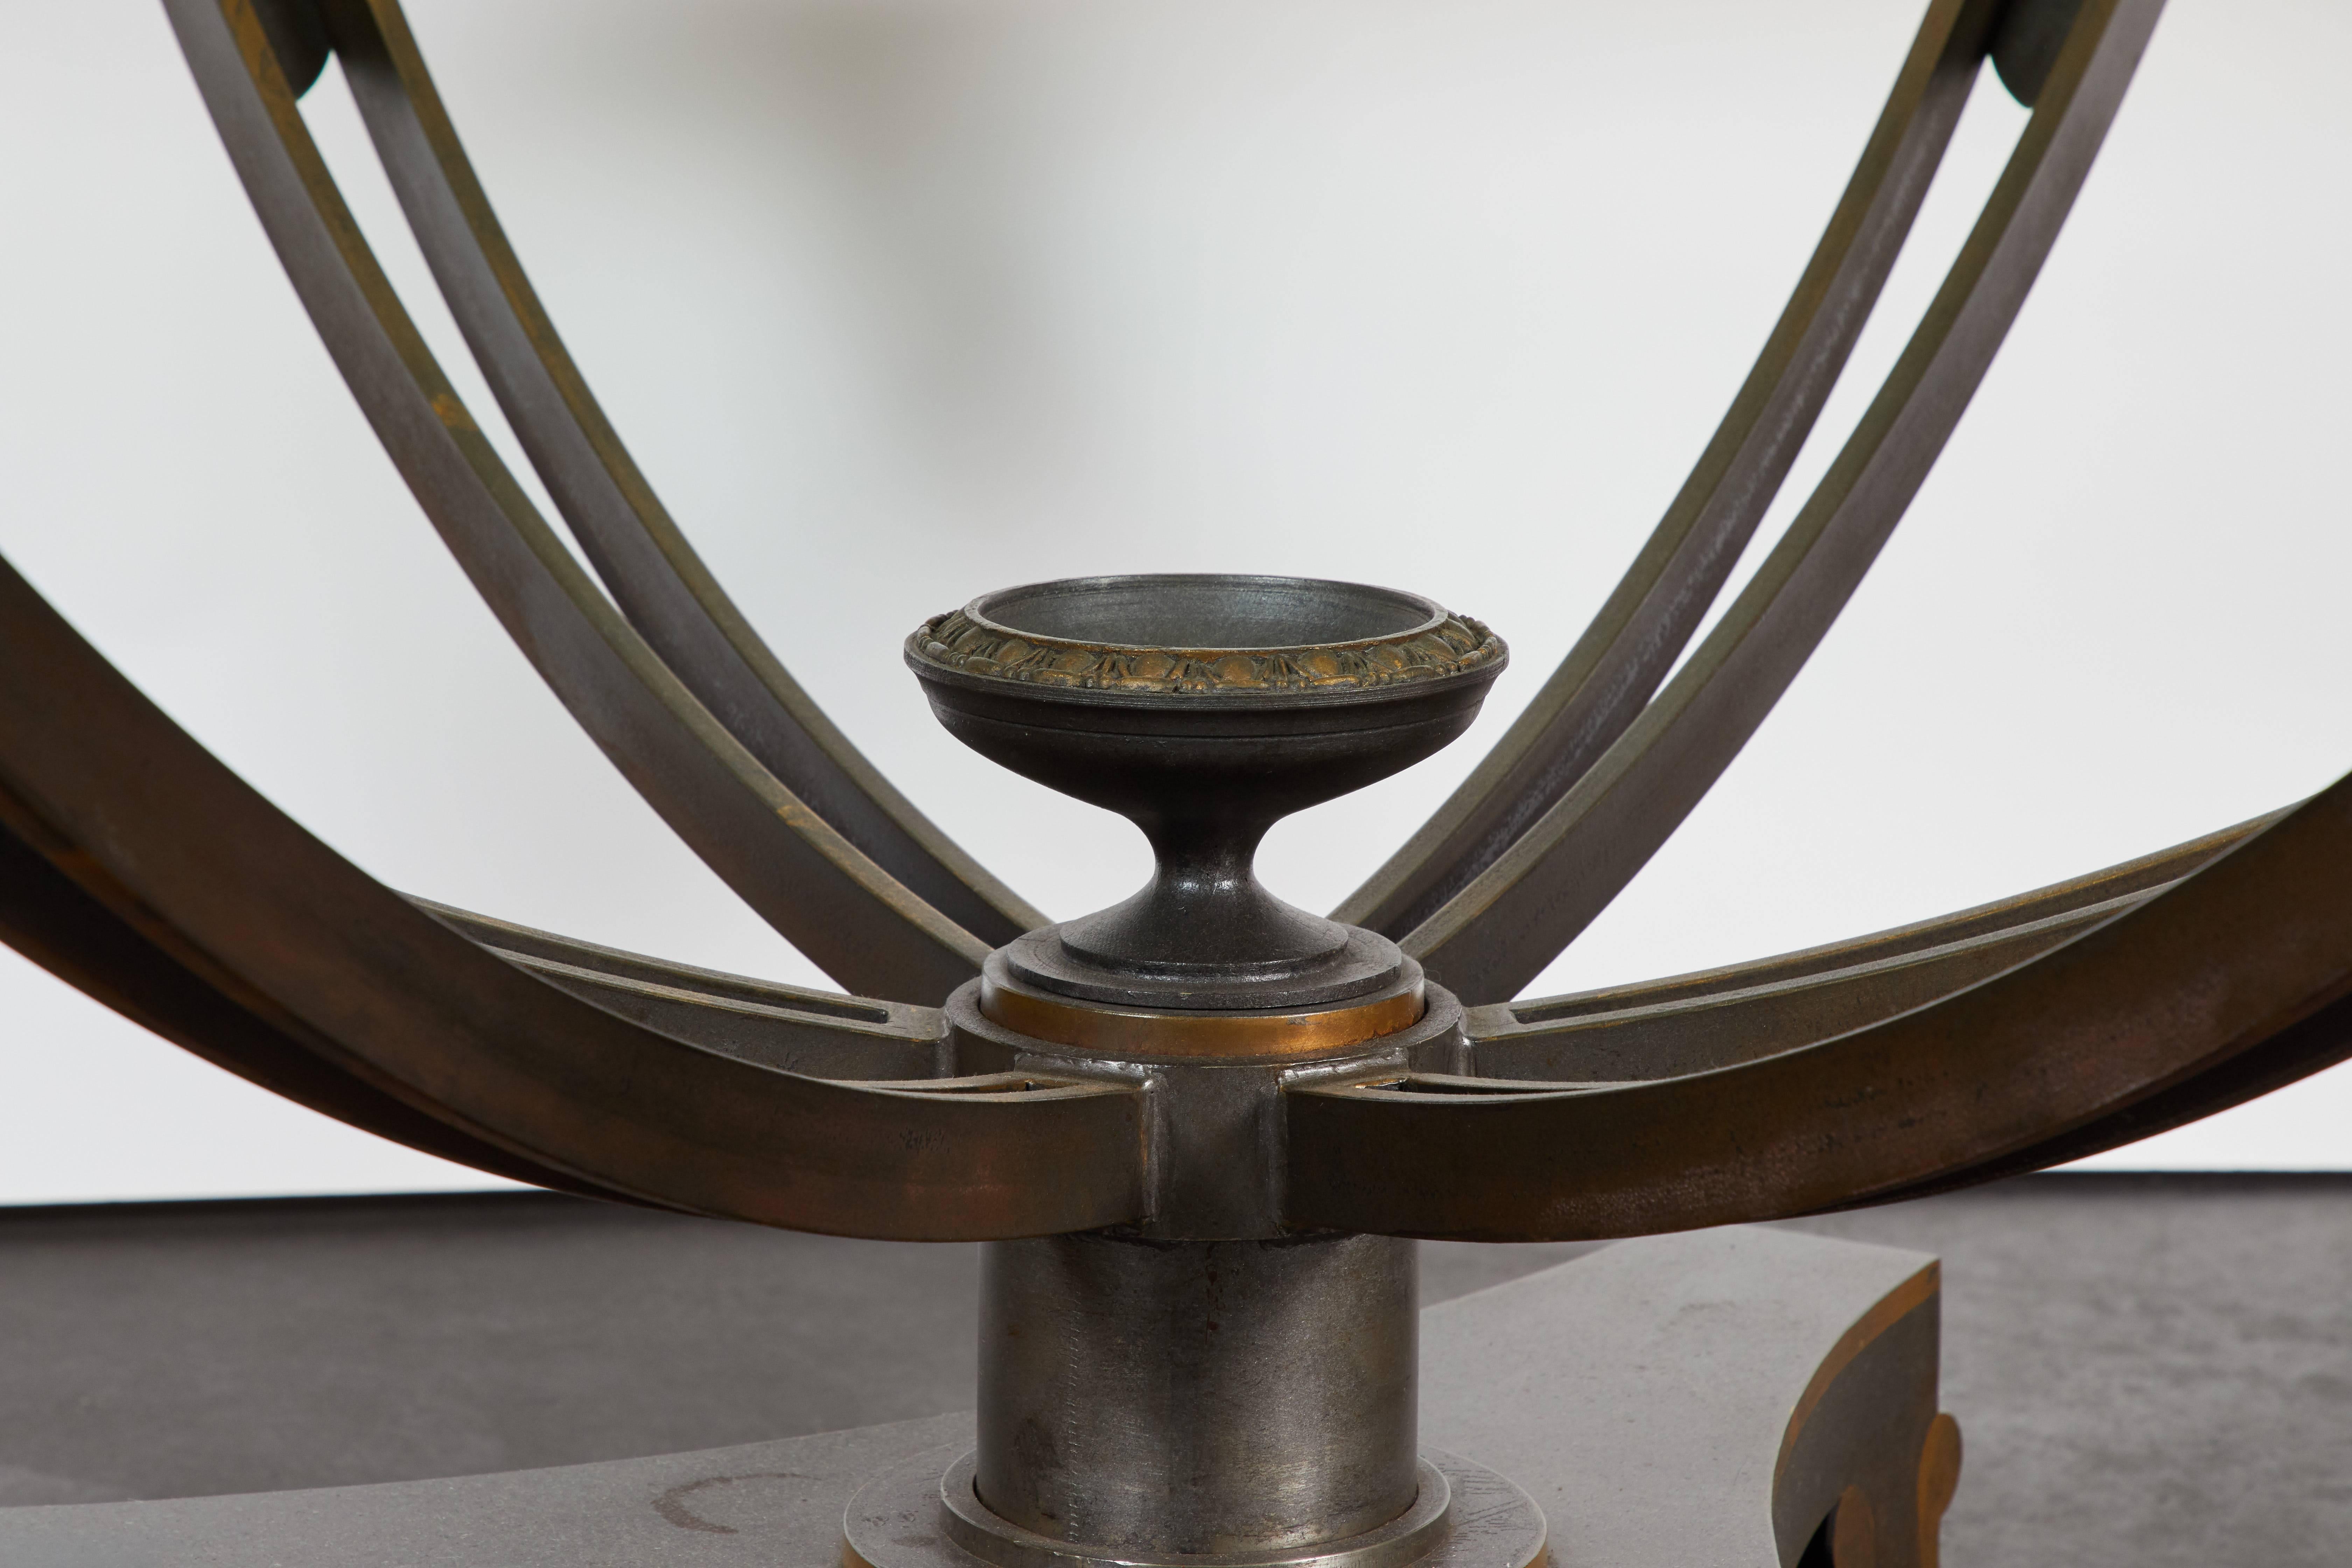 A handsome 1950s neoclassical style bronze center table featuring a glass top. The tables features also include a central finial with intricate egg and dart detailing.